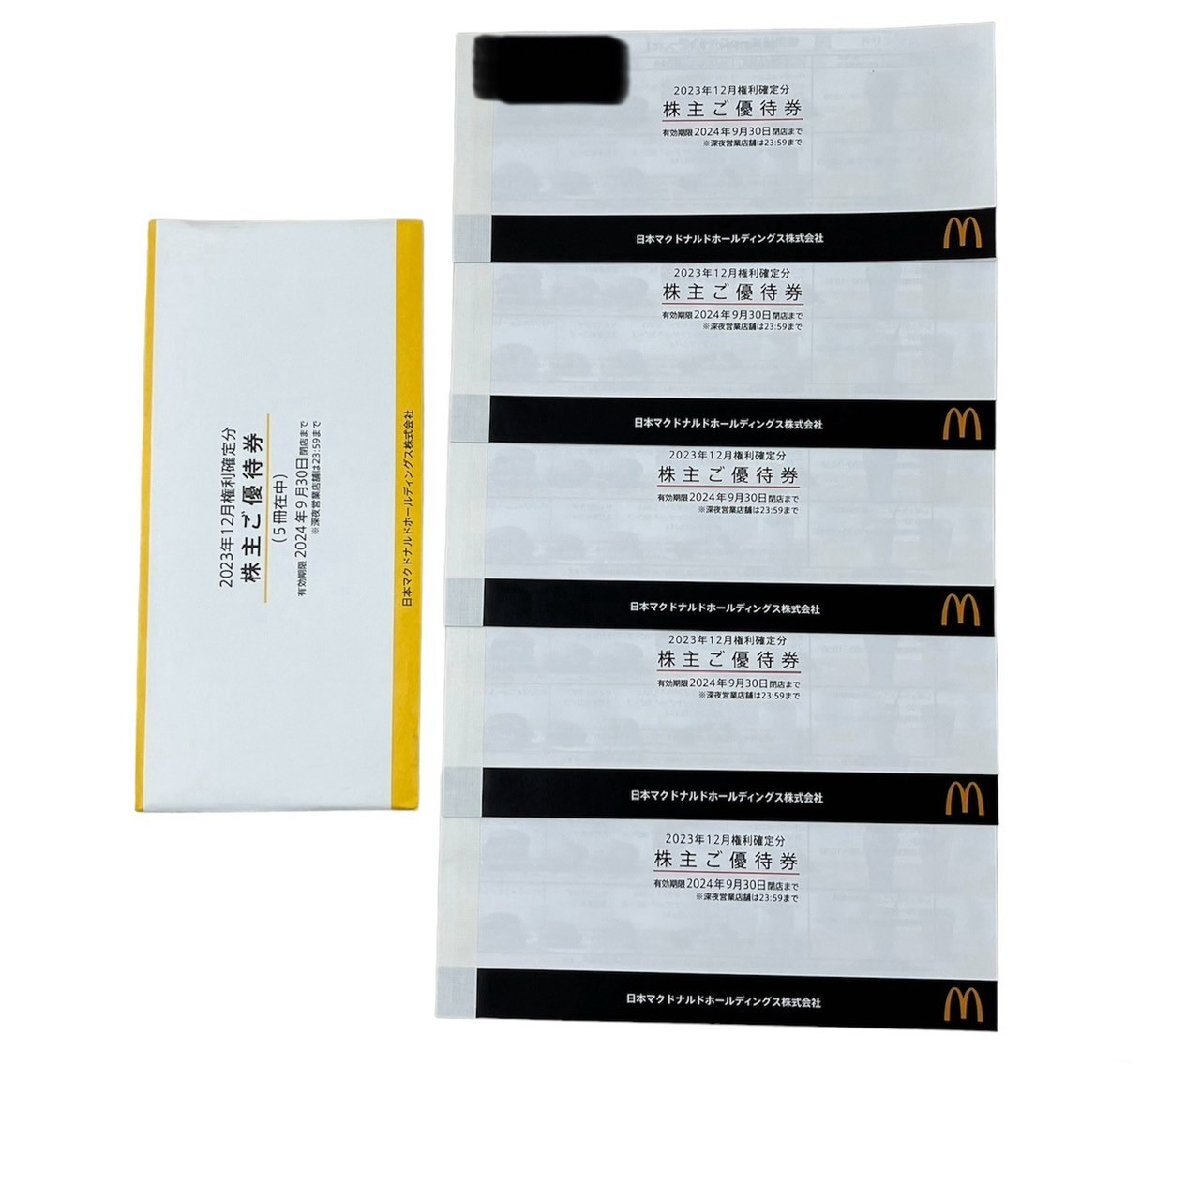  unused McDonald's stockholder . complimentary ticket have efficacy time limit 2024.9.30 till 6 sheets ×5 pcs. postage 140 jpy value set Mac stockholder complimentary ticket coupon handle burger ①